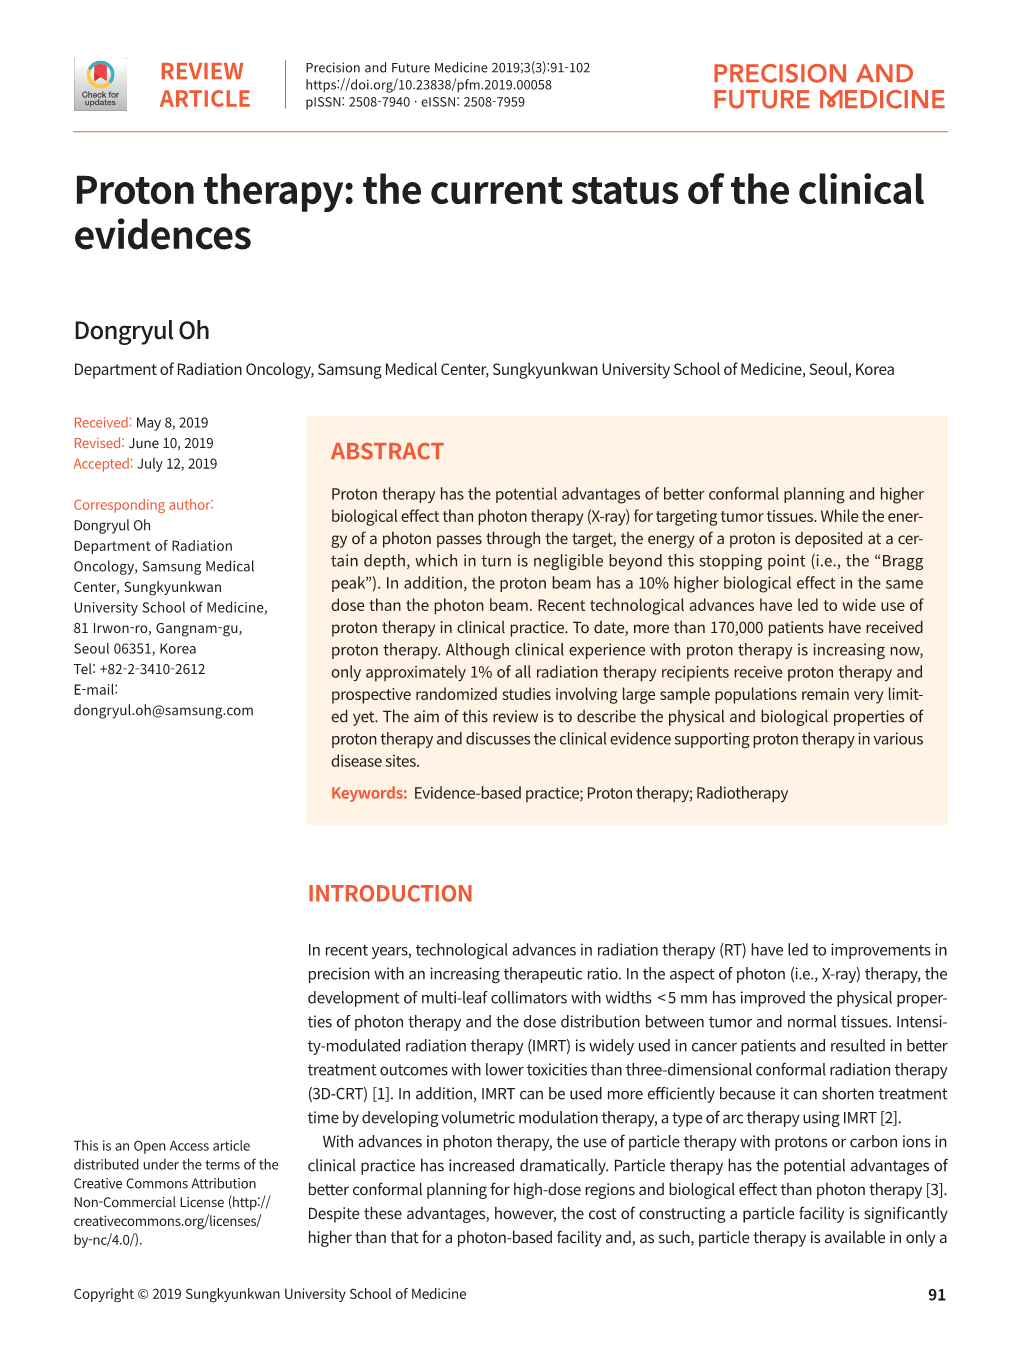 Proton Therapy: the Current Status of the Clinical Evidences